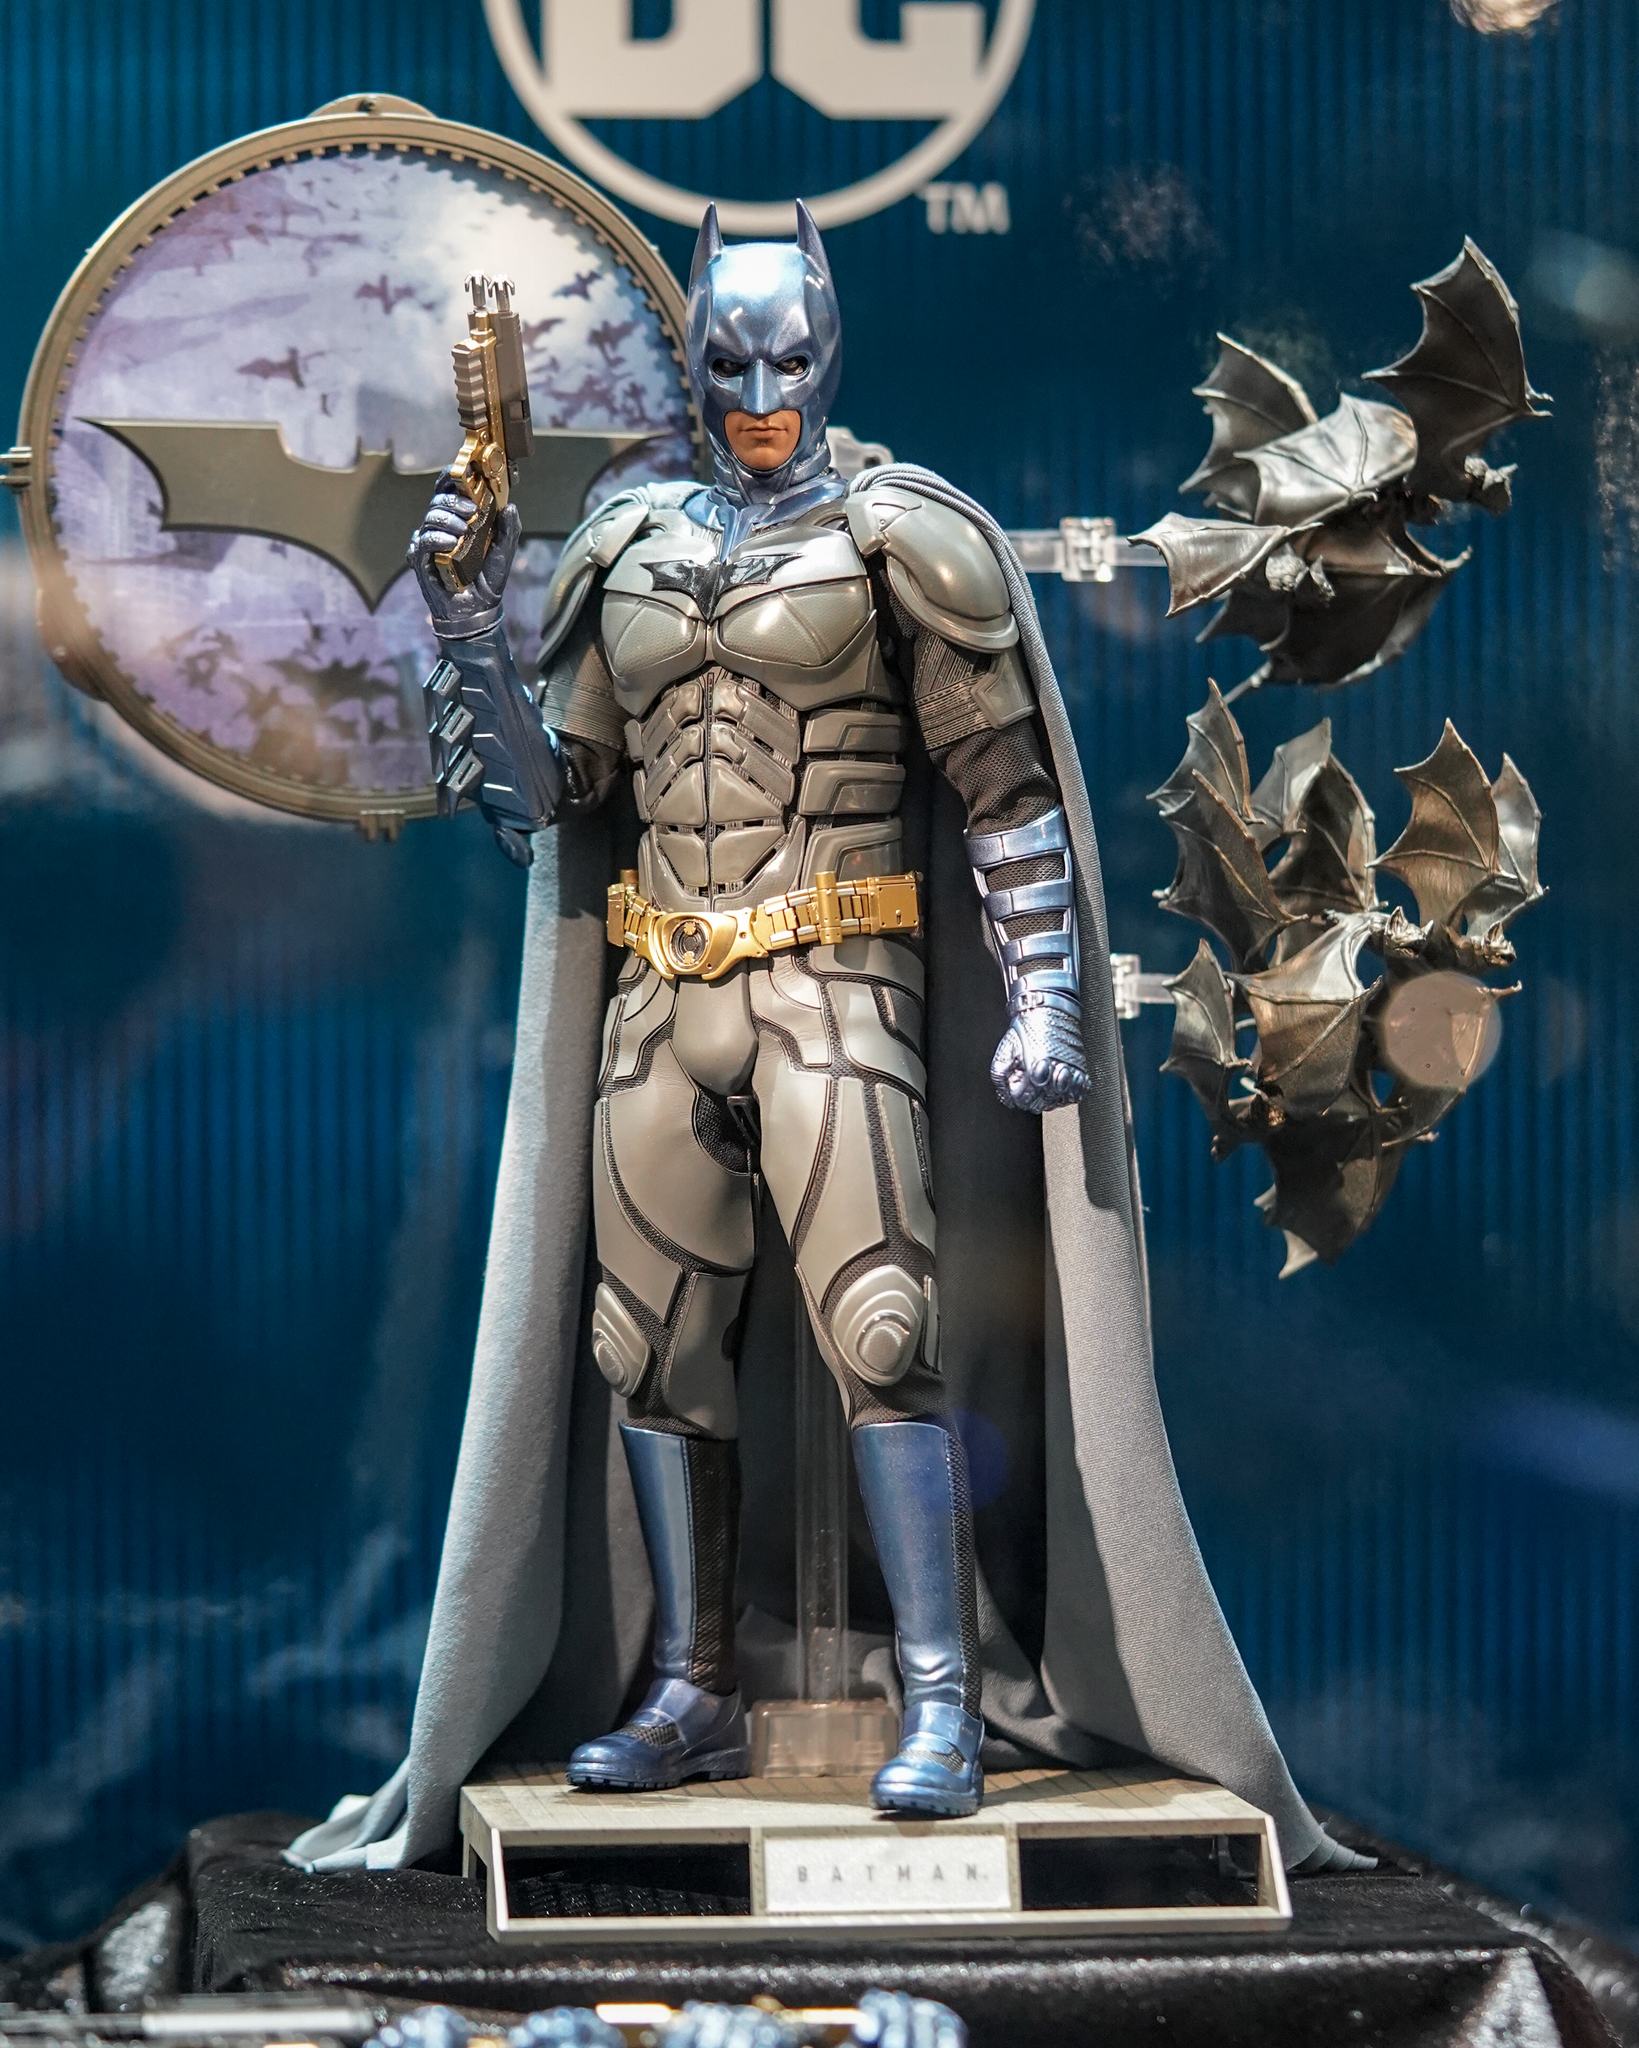 Batmobile Sixth Scale Figure Accessory by Hot Toys